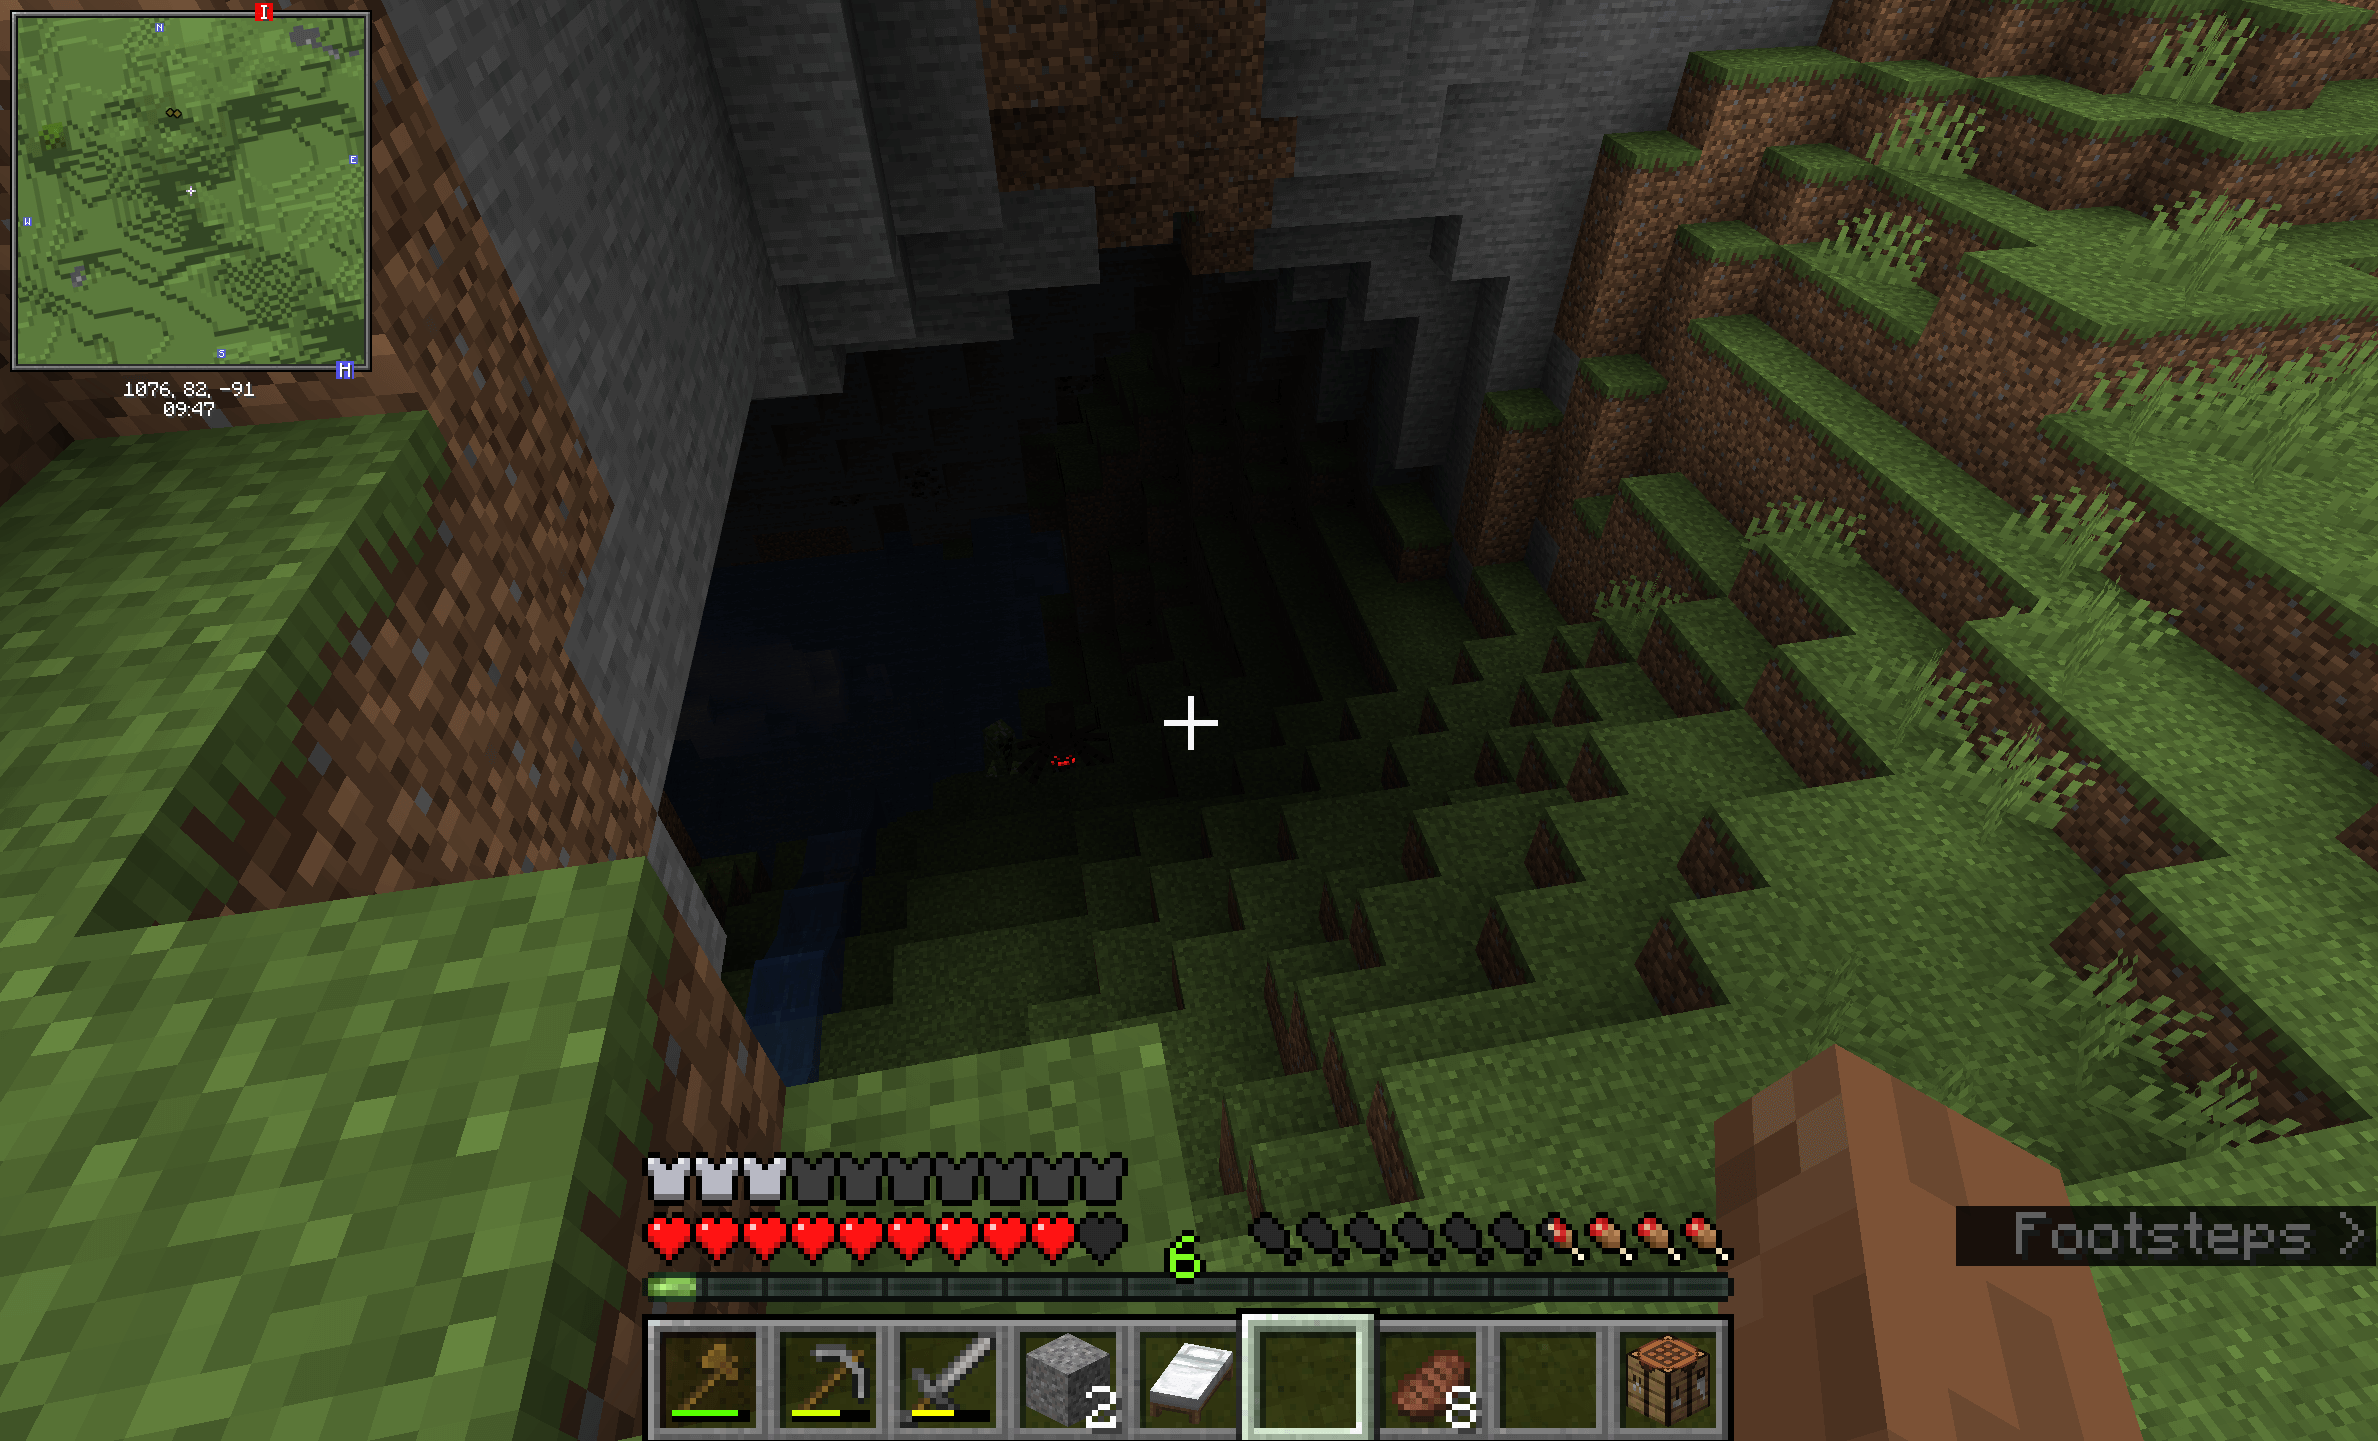 Minecraft screenshot looking down into a dark gave. In the darkness are the glowing red eyes of a spider monster.